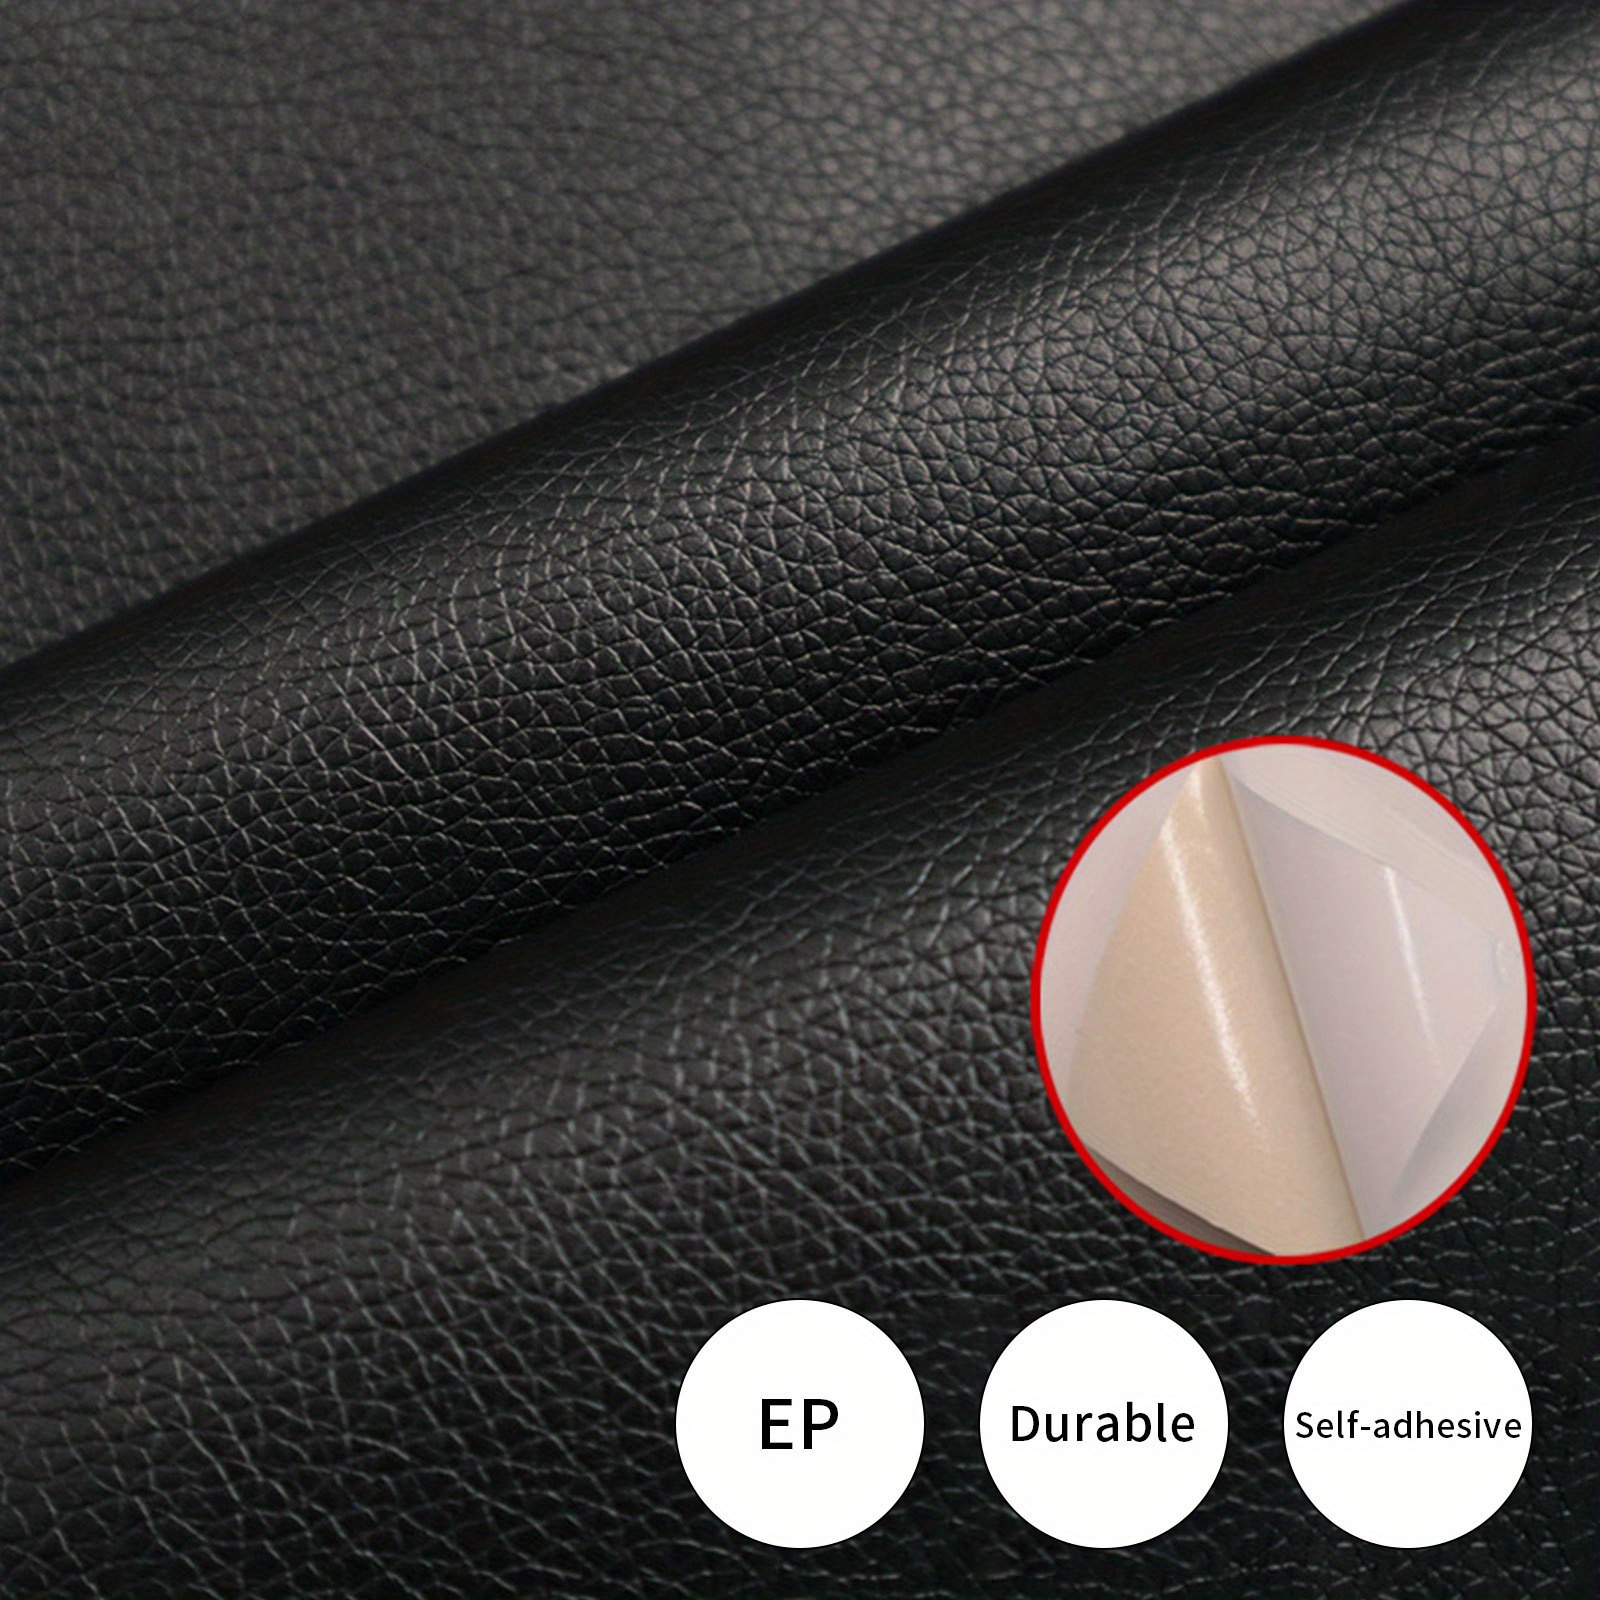 Leather Repair Patch Self-adhesive PU Leather Tape Leather Patch Black  Brown Grey Beige for Sofas Couch Furniture Drivers Seat